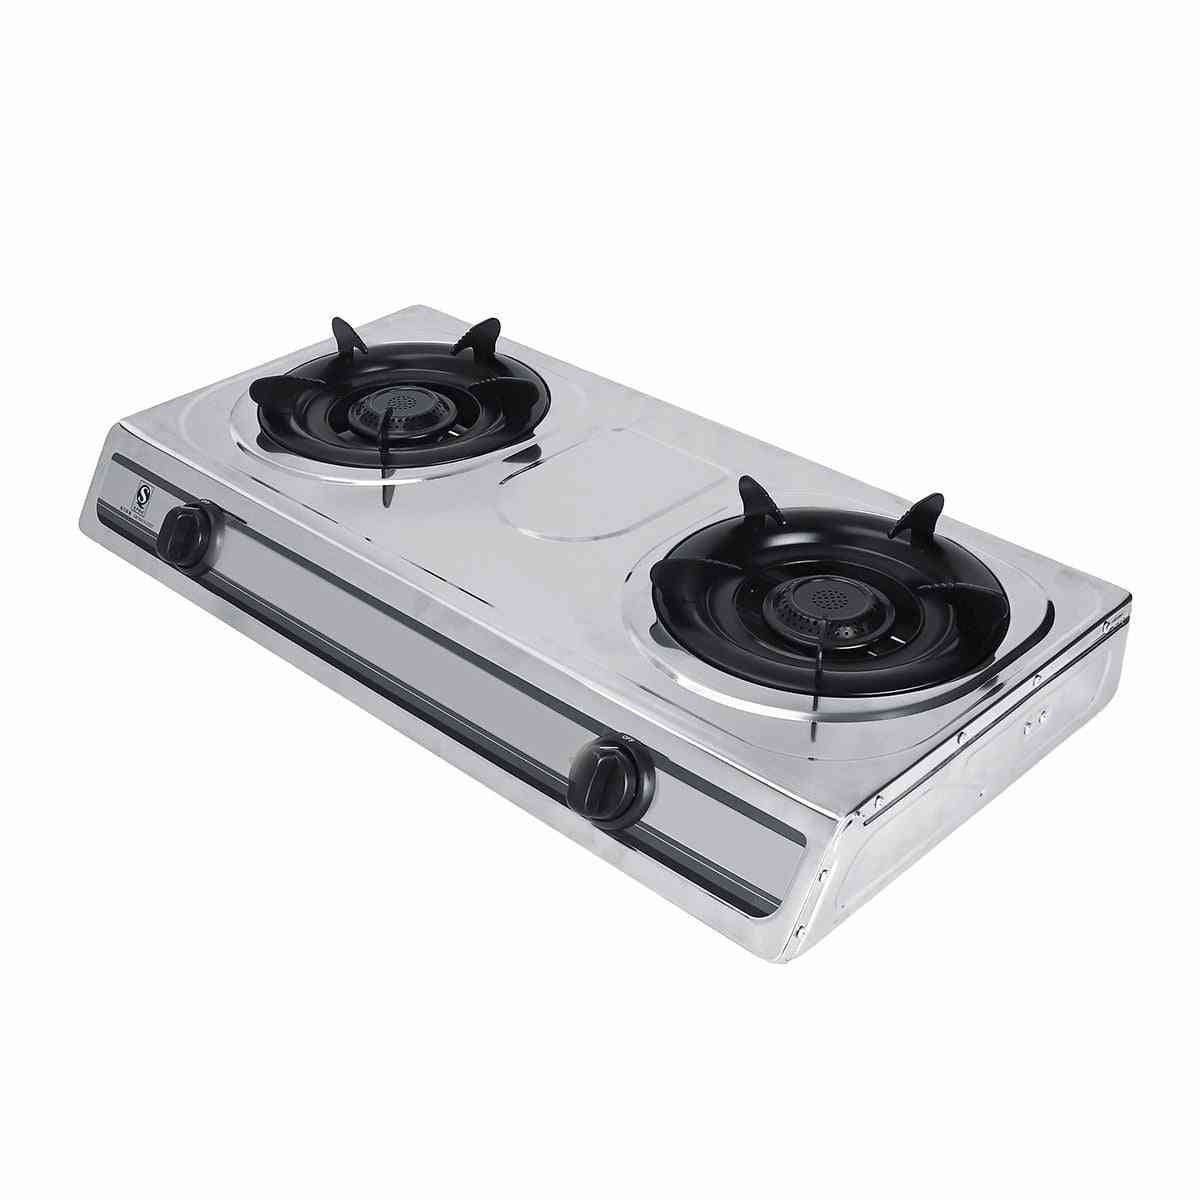 4000w Lpg Liquefied Petroleum Gas And Benchtop Double Hole Cooker Stove